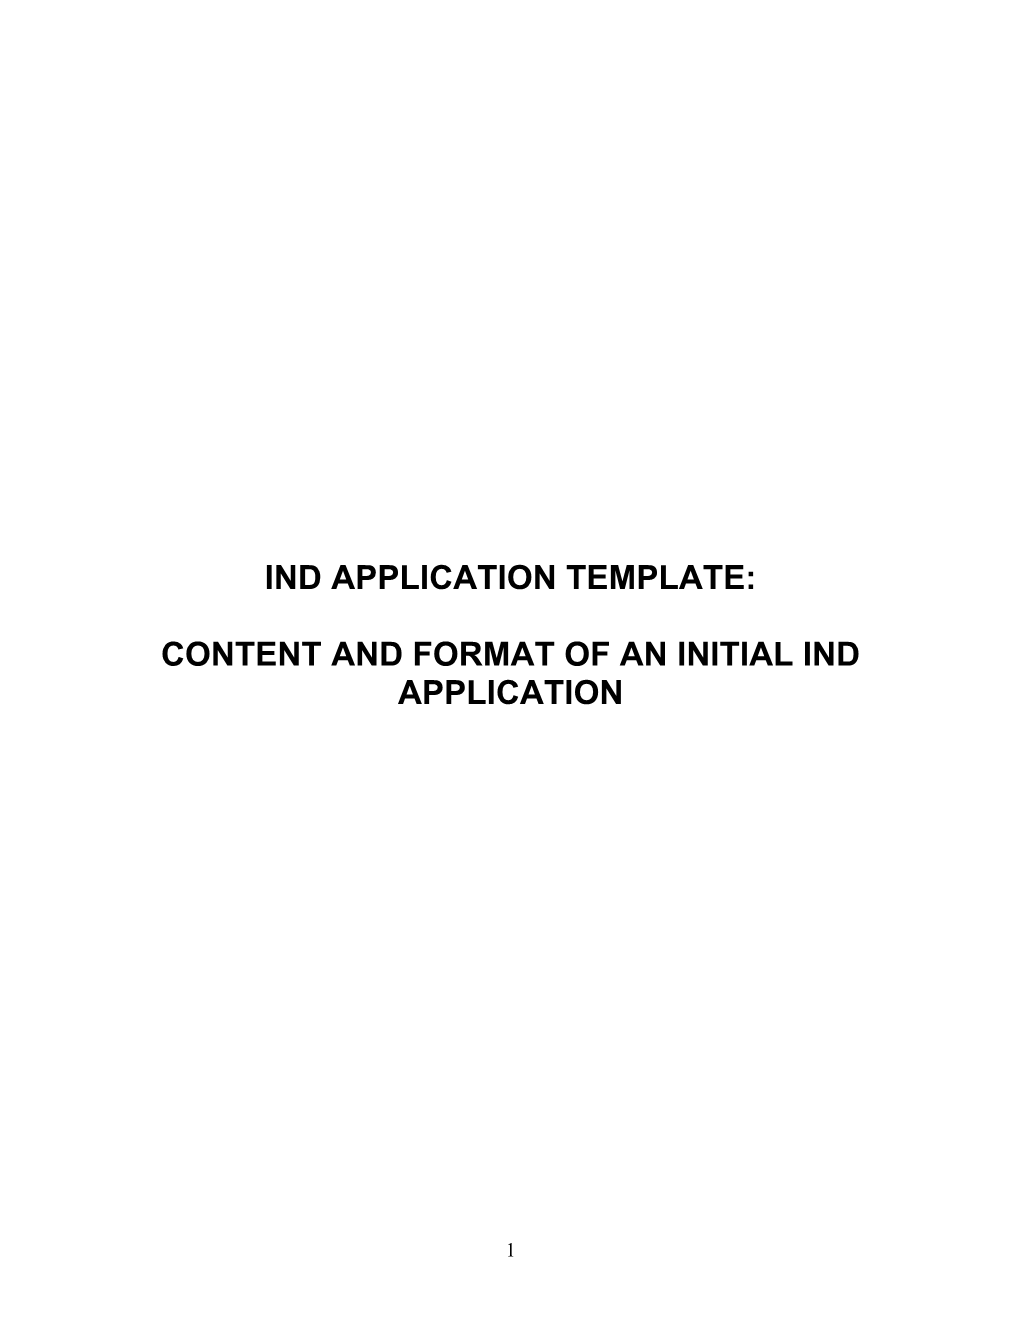 IND Application Template s1